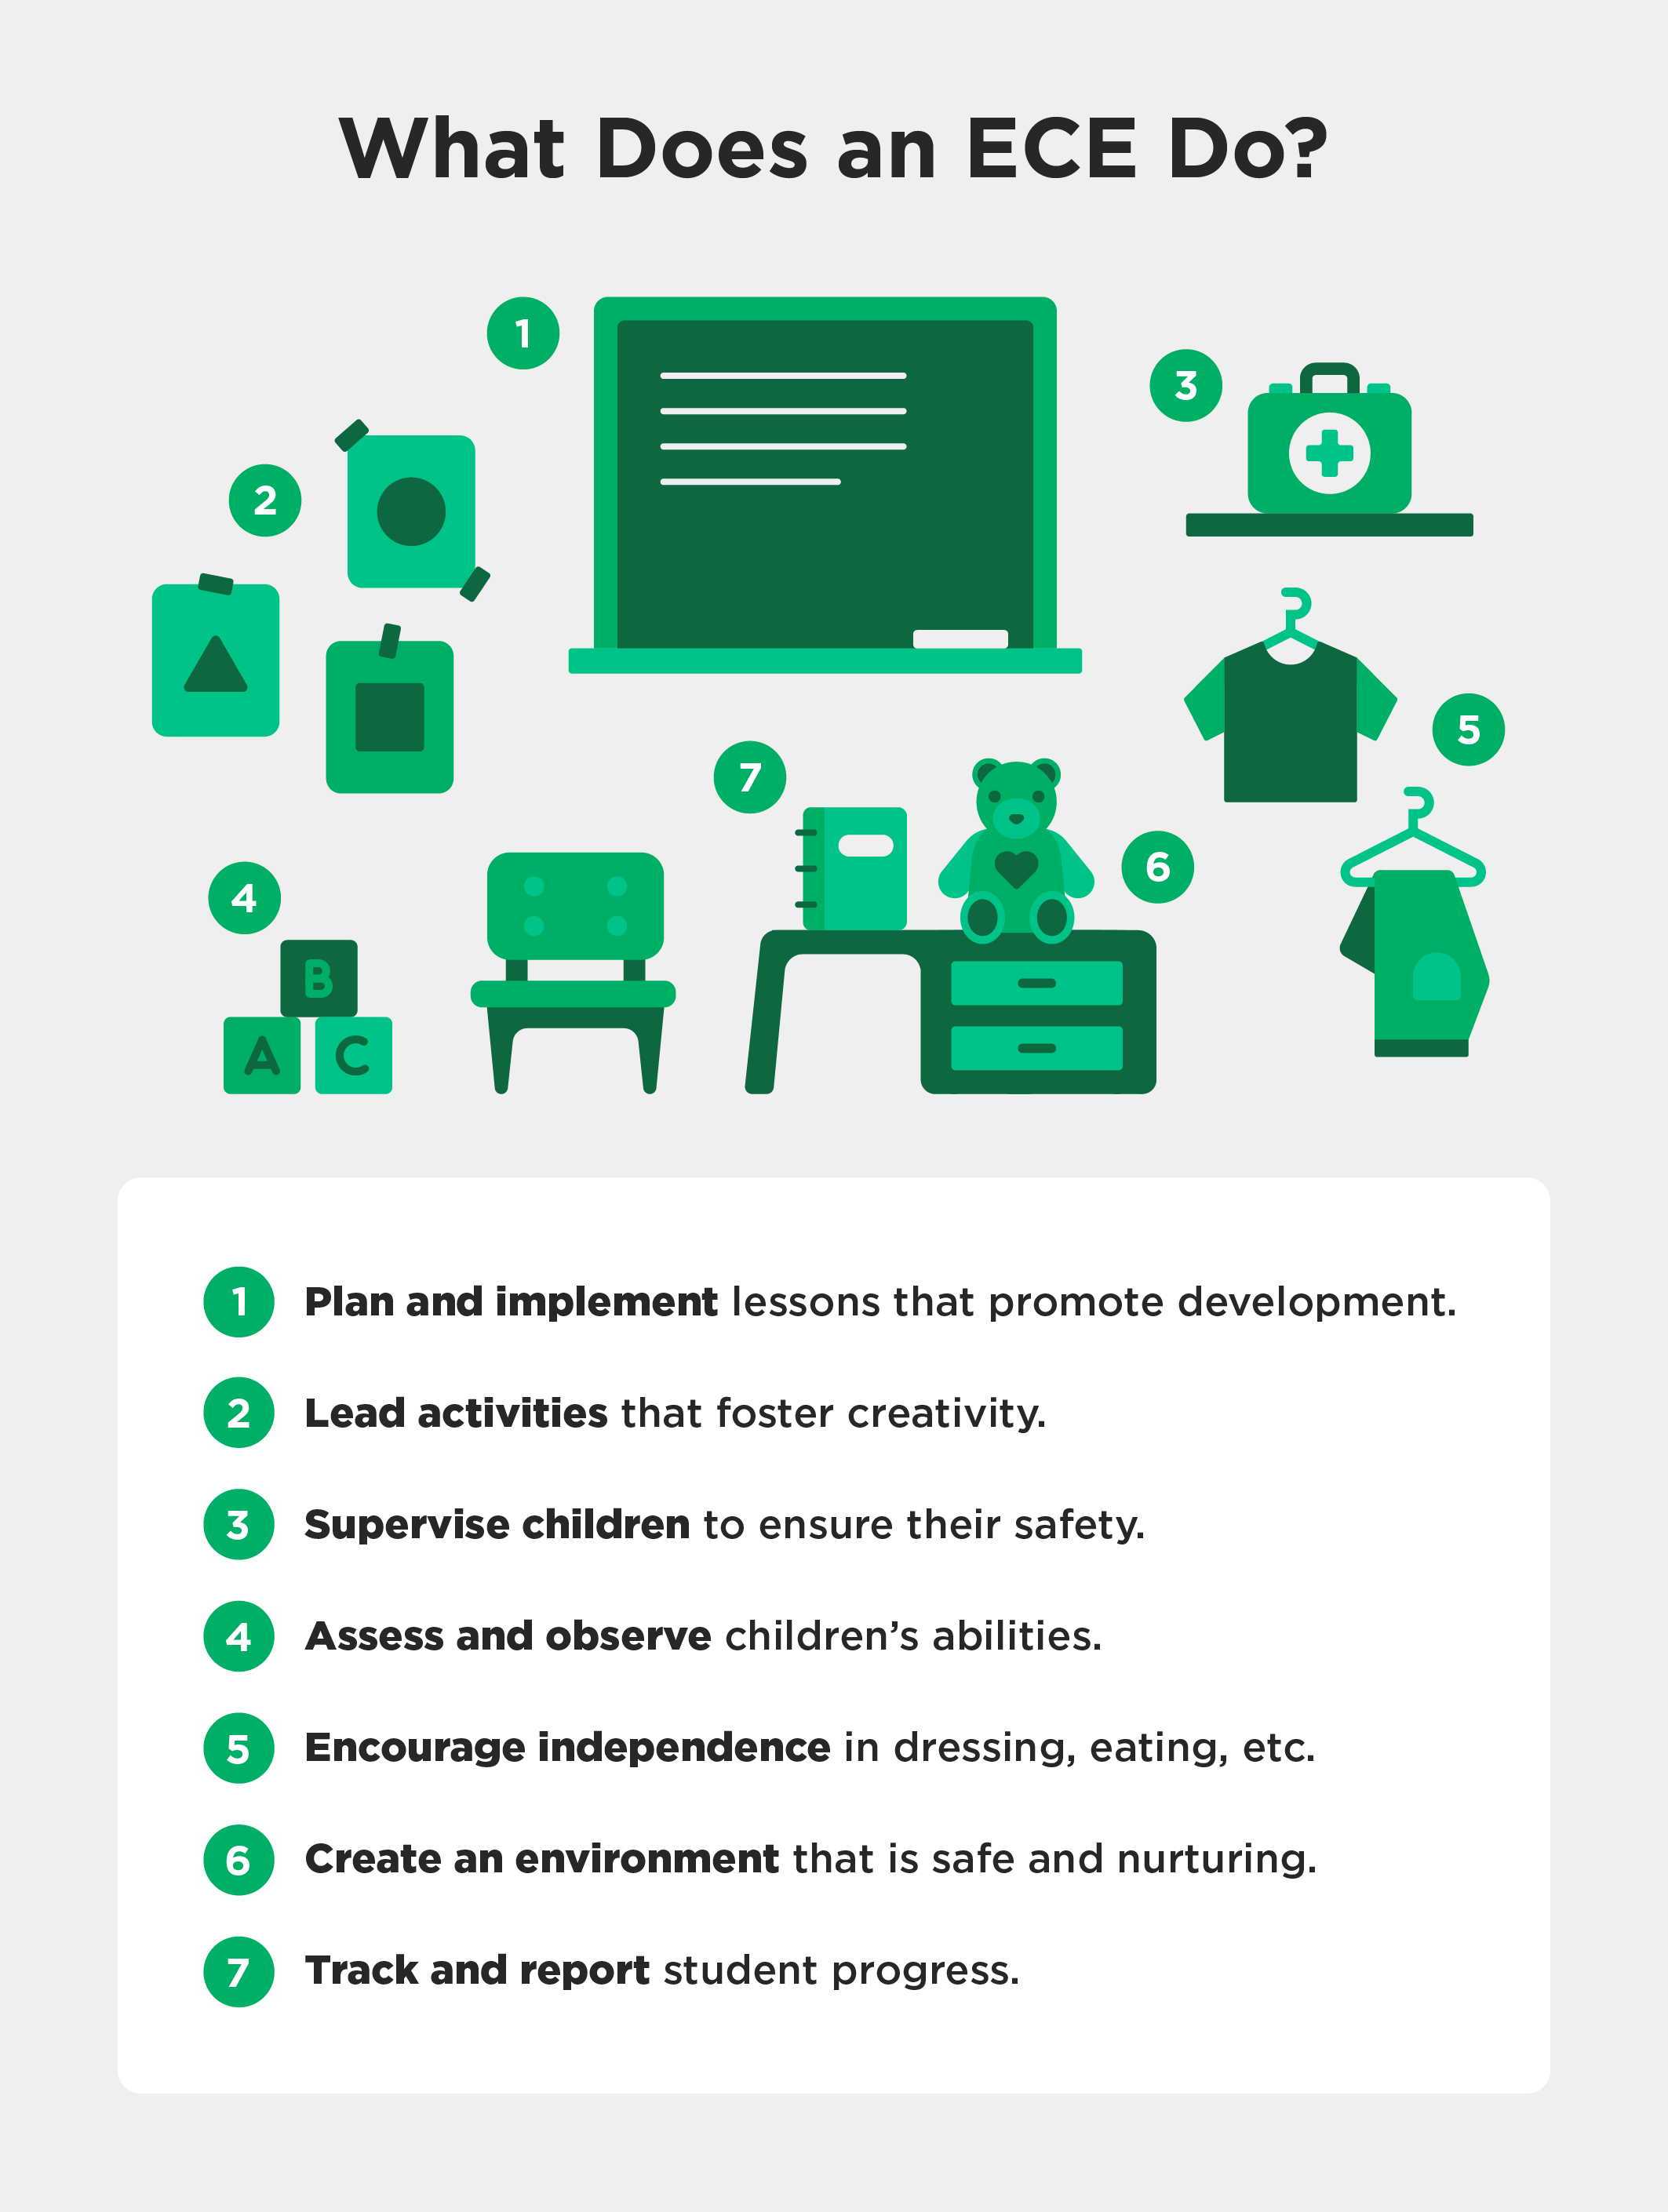 Illustration of a classroom with a list of main responsibilities of an ECE.